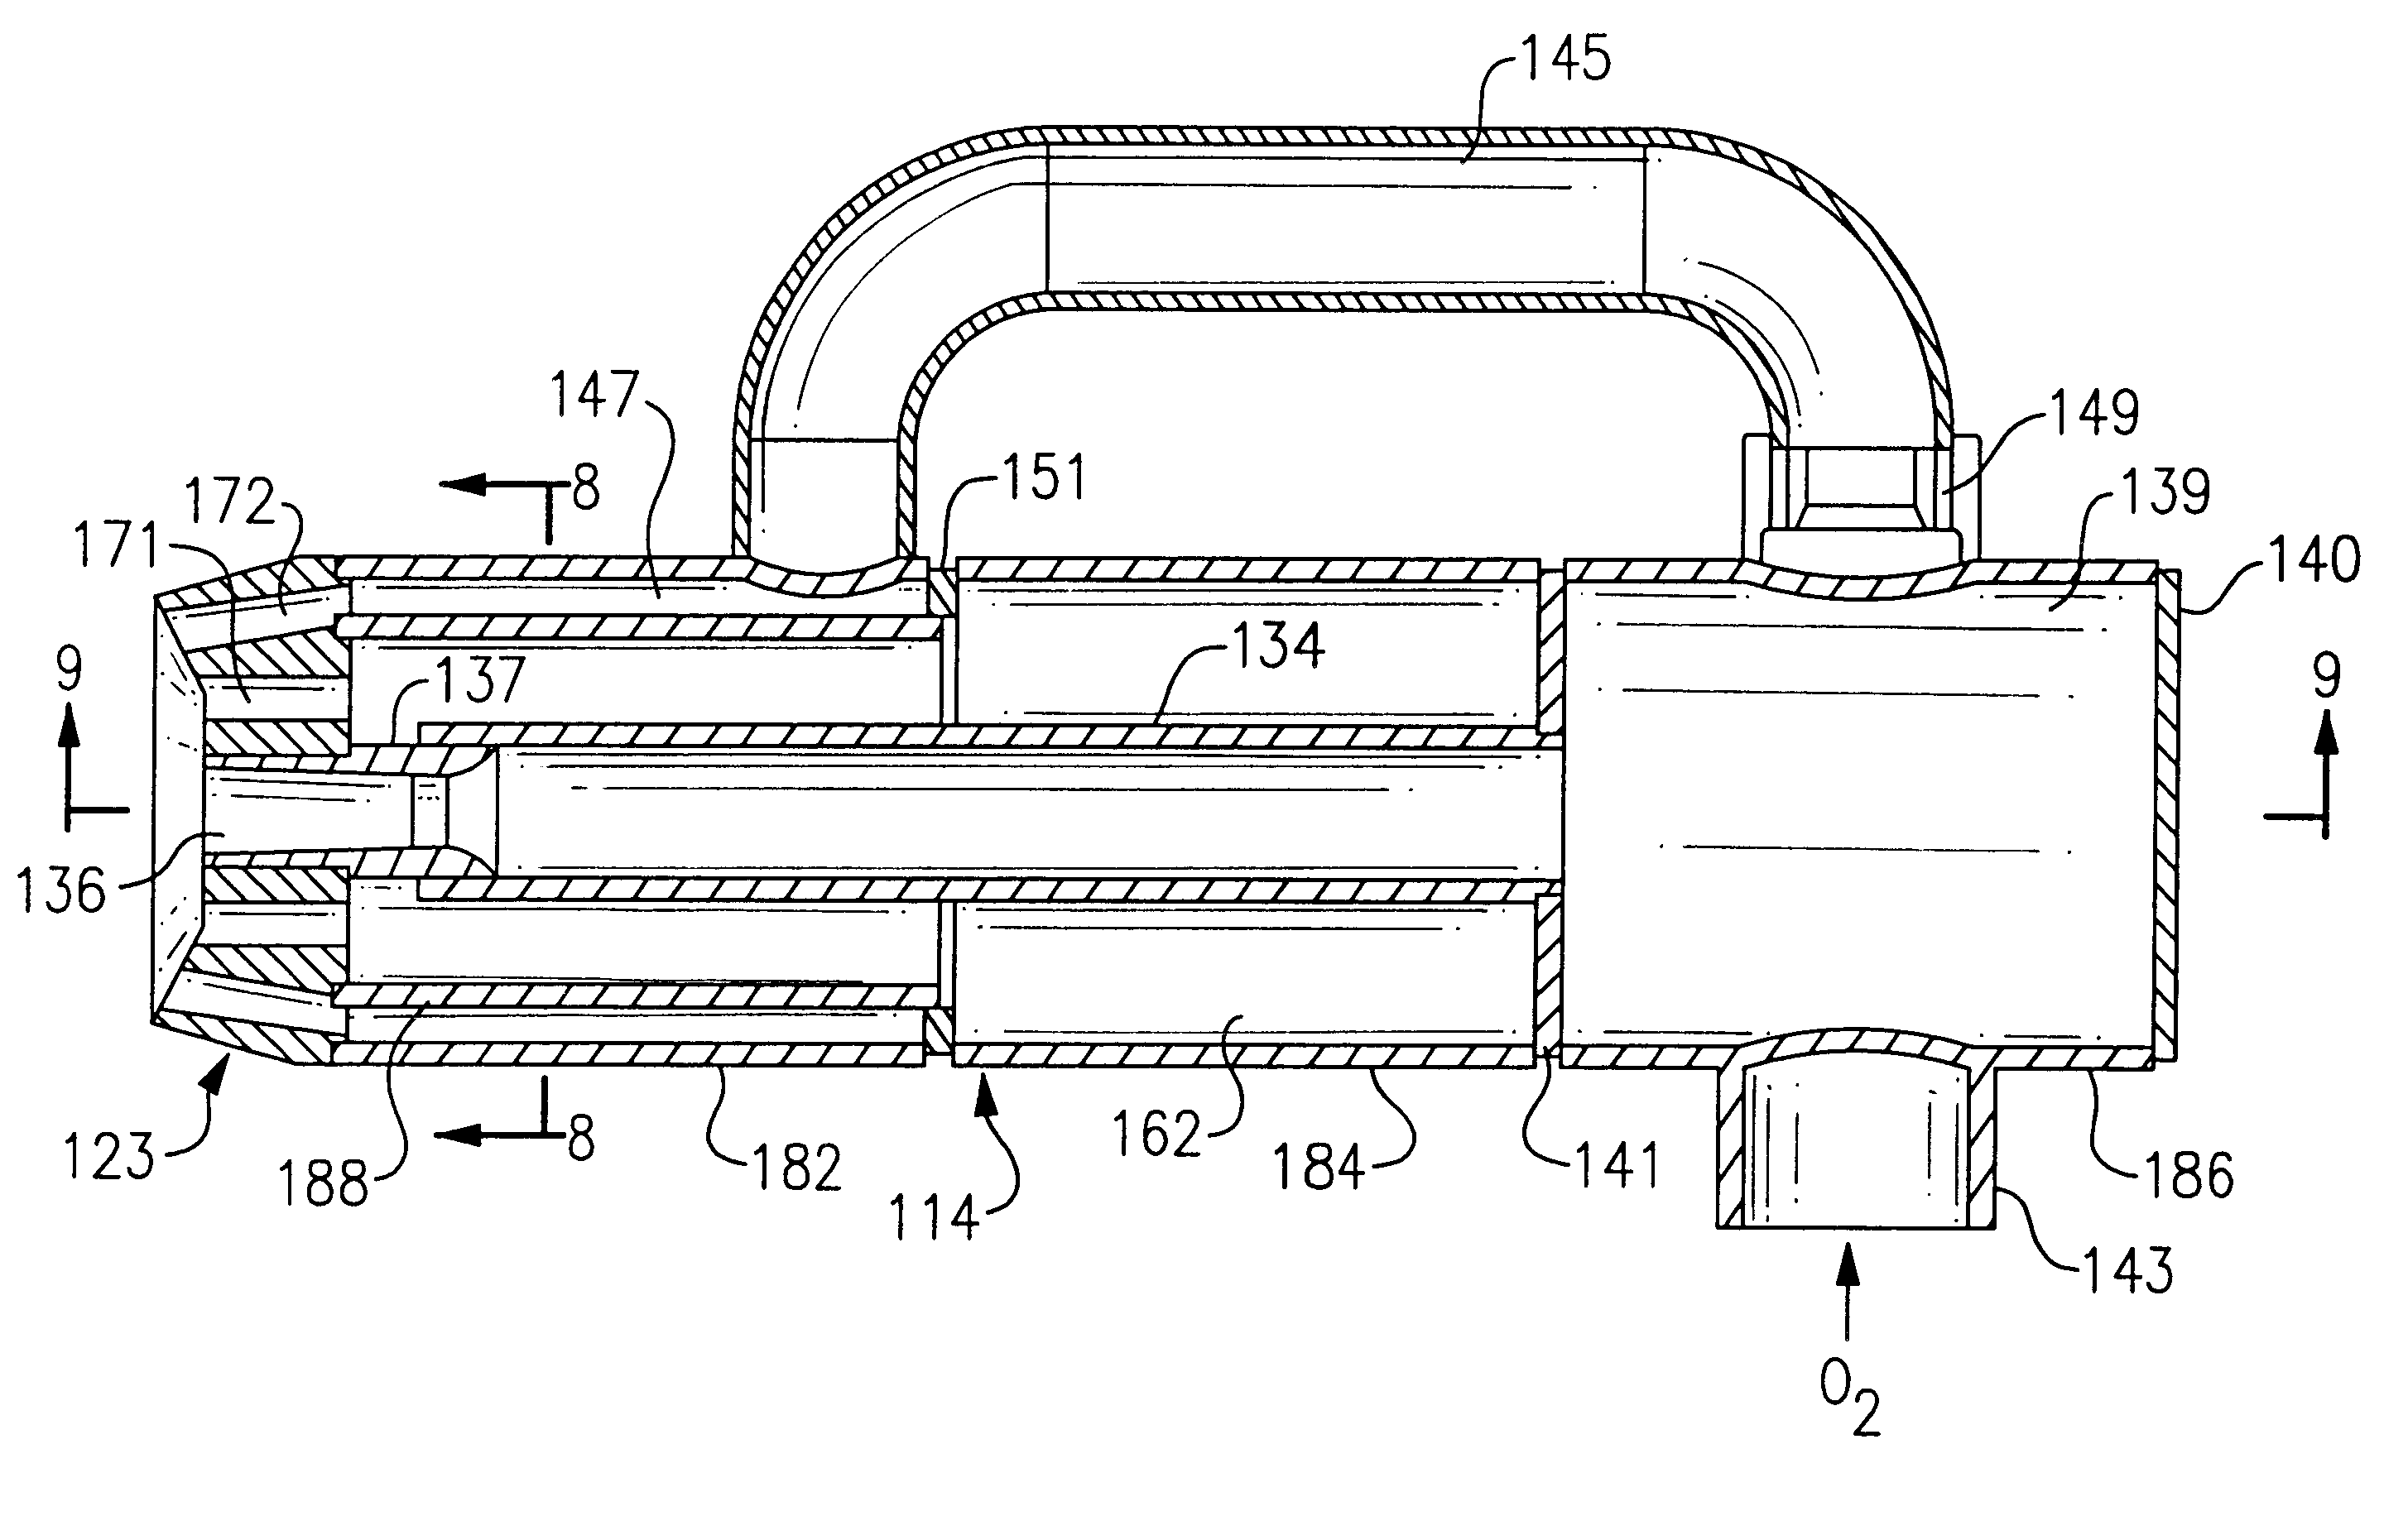 Method for metal melting, refining and processing